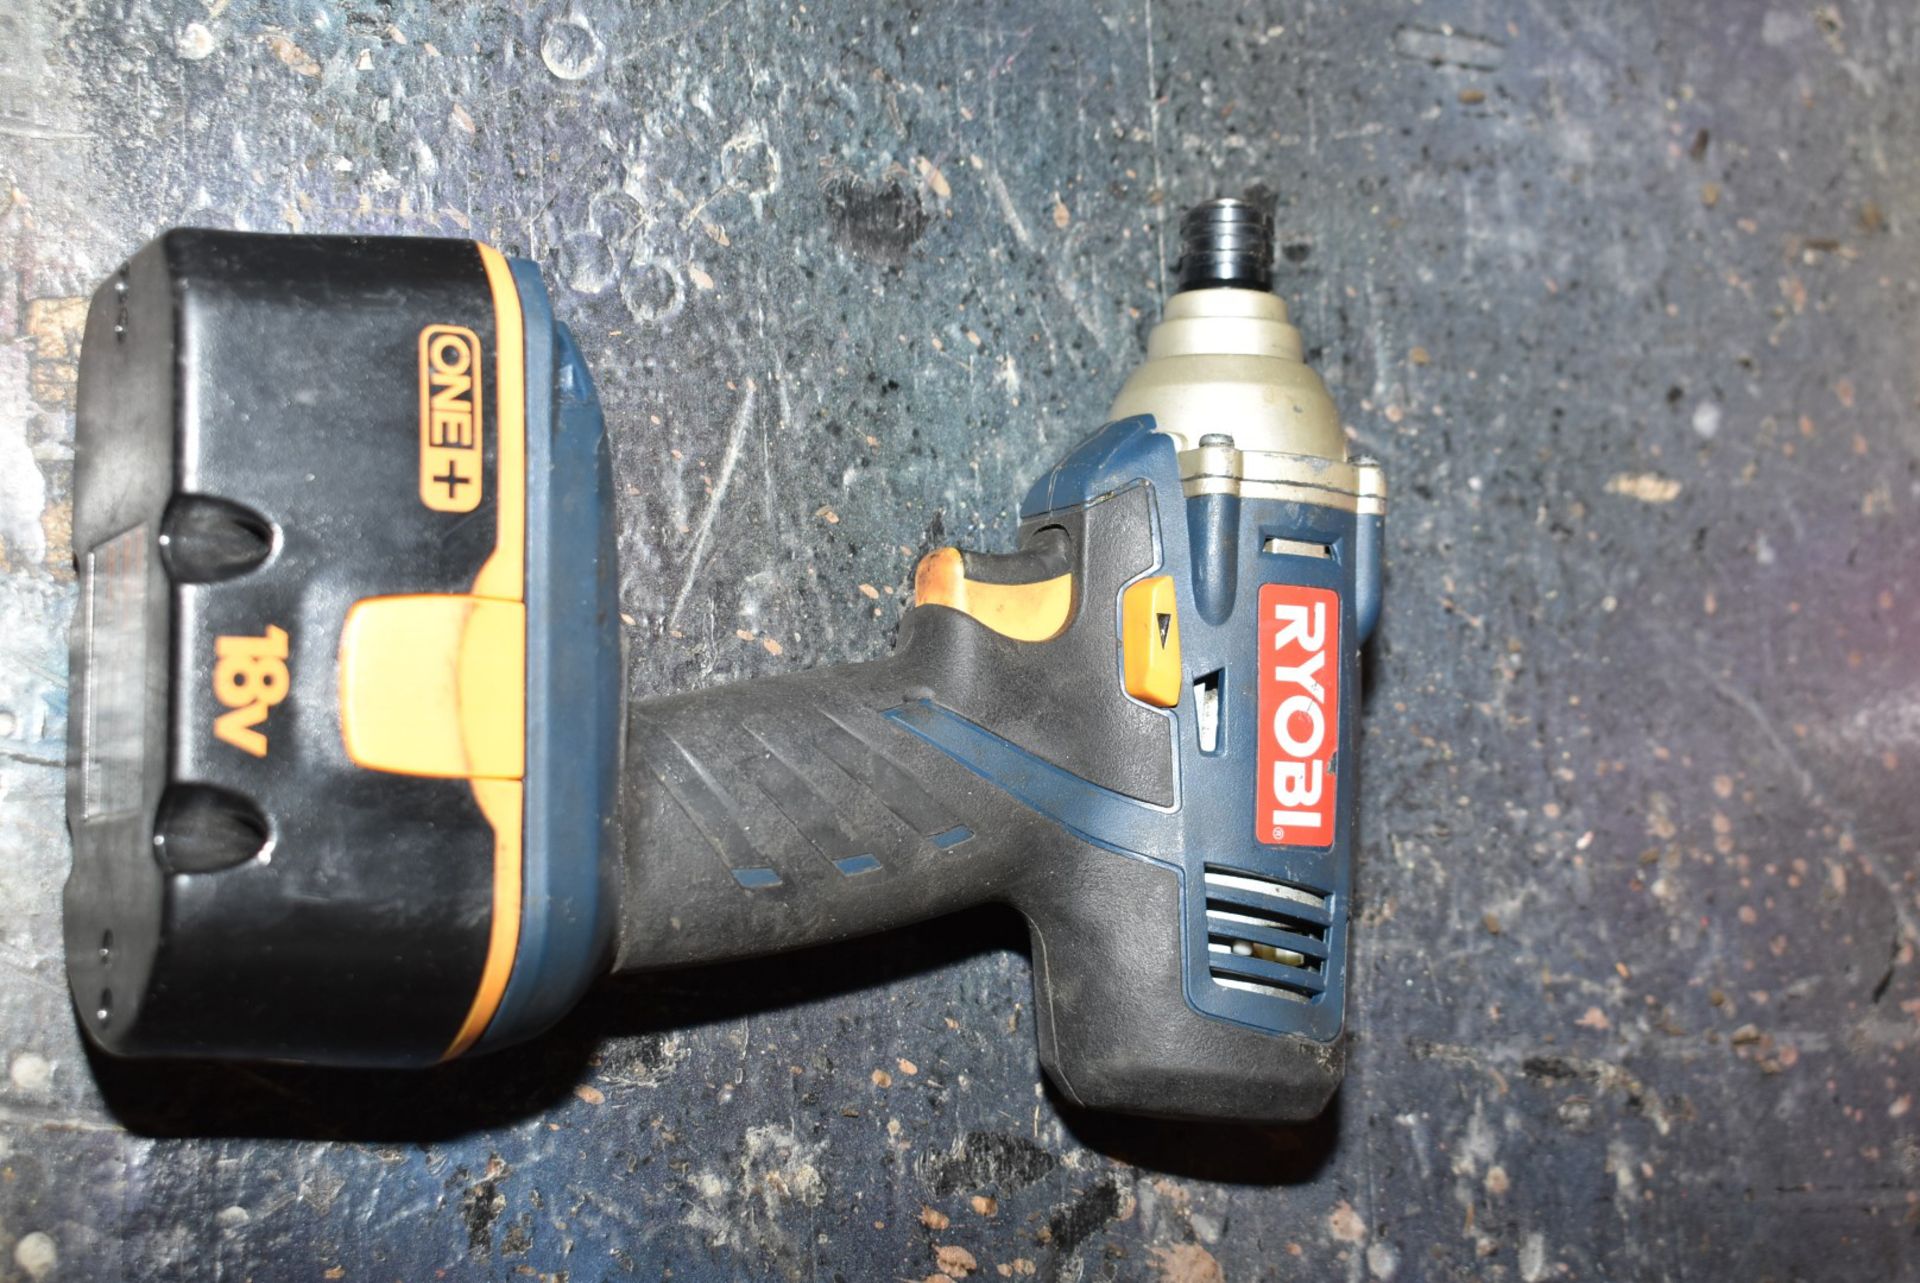 LOT/ RYOBI 18V CORDLESS IMPACT DRIVER WITH (2) BATTERIES & CHARGER - Image 2 of 4